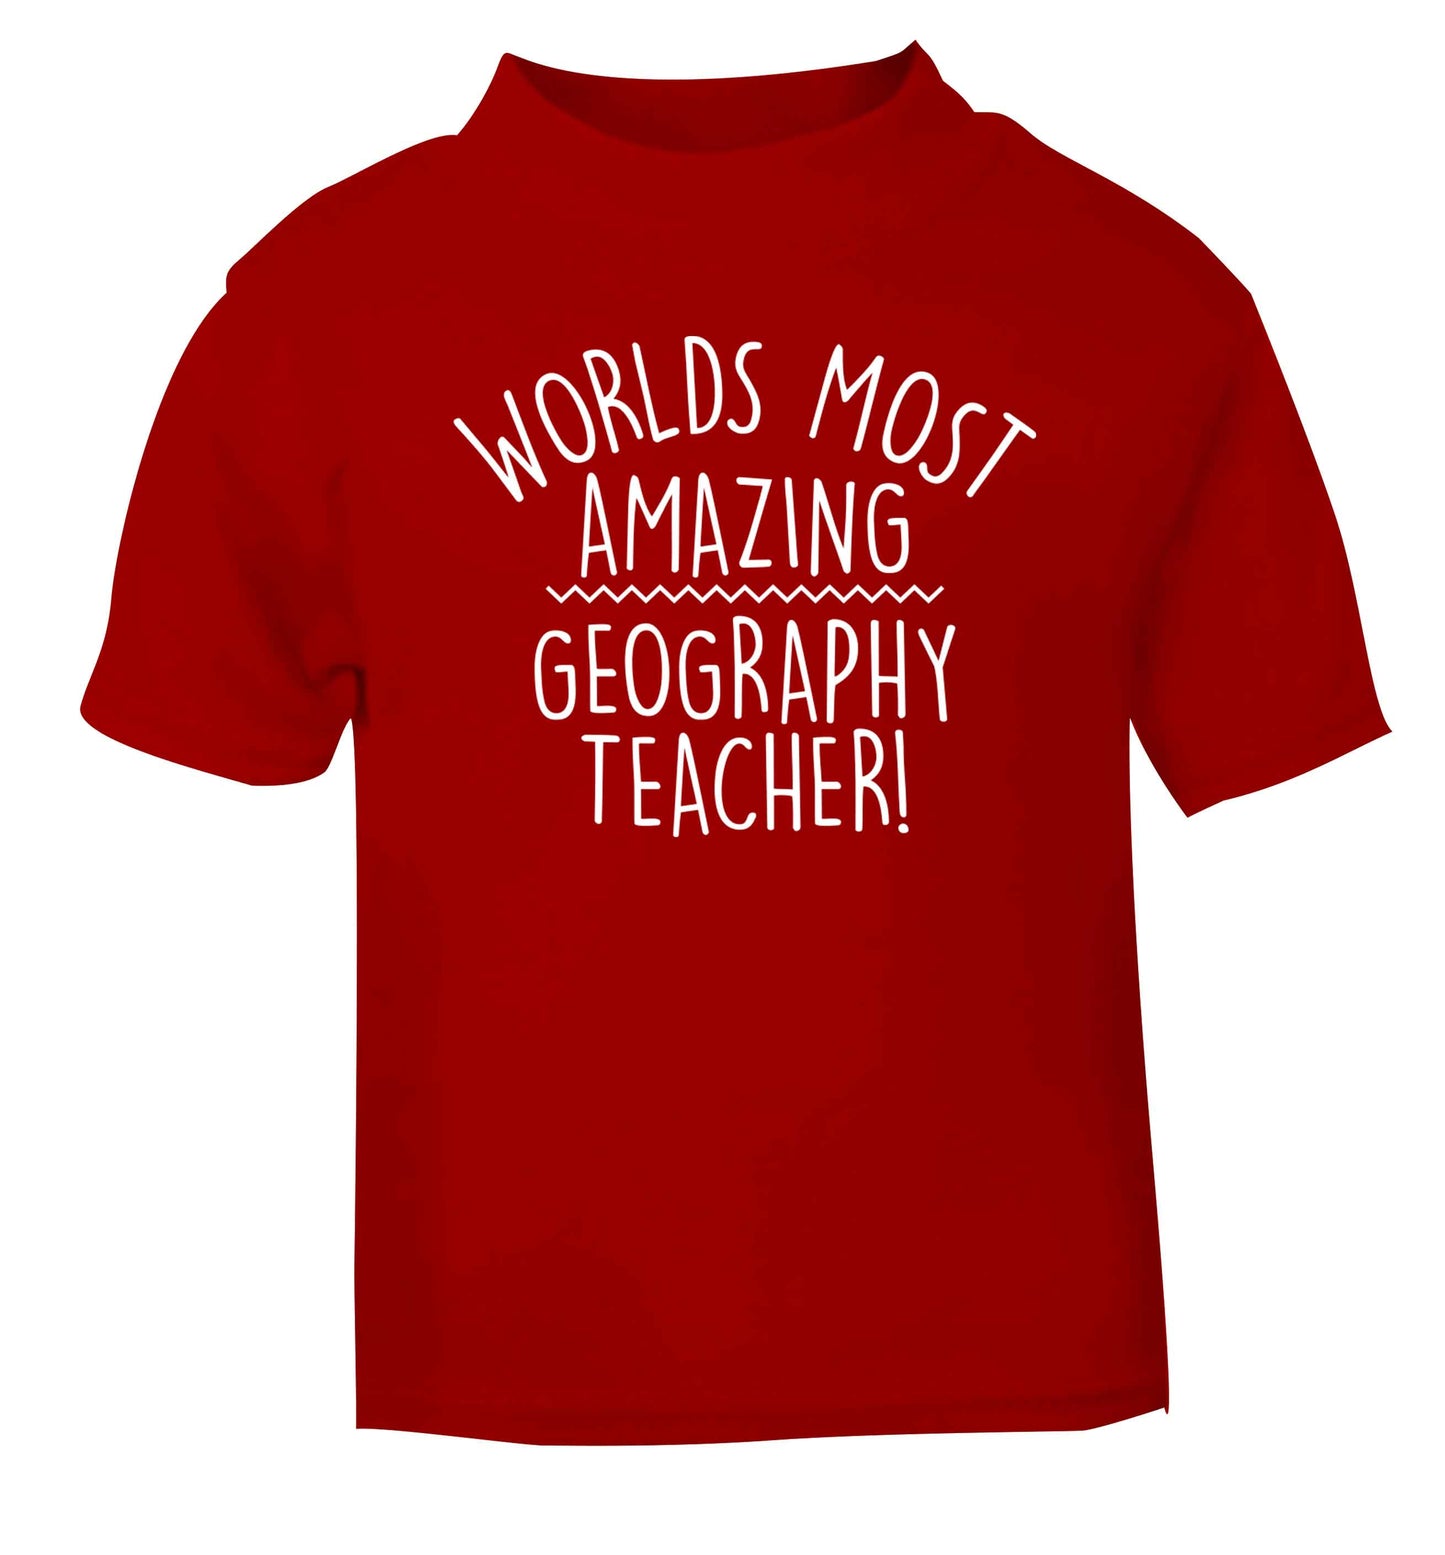 Worlds most amazing geography teacher red baby toddler Tshirt 2 Years